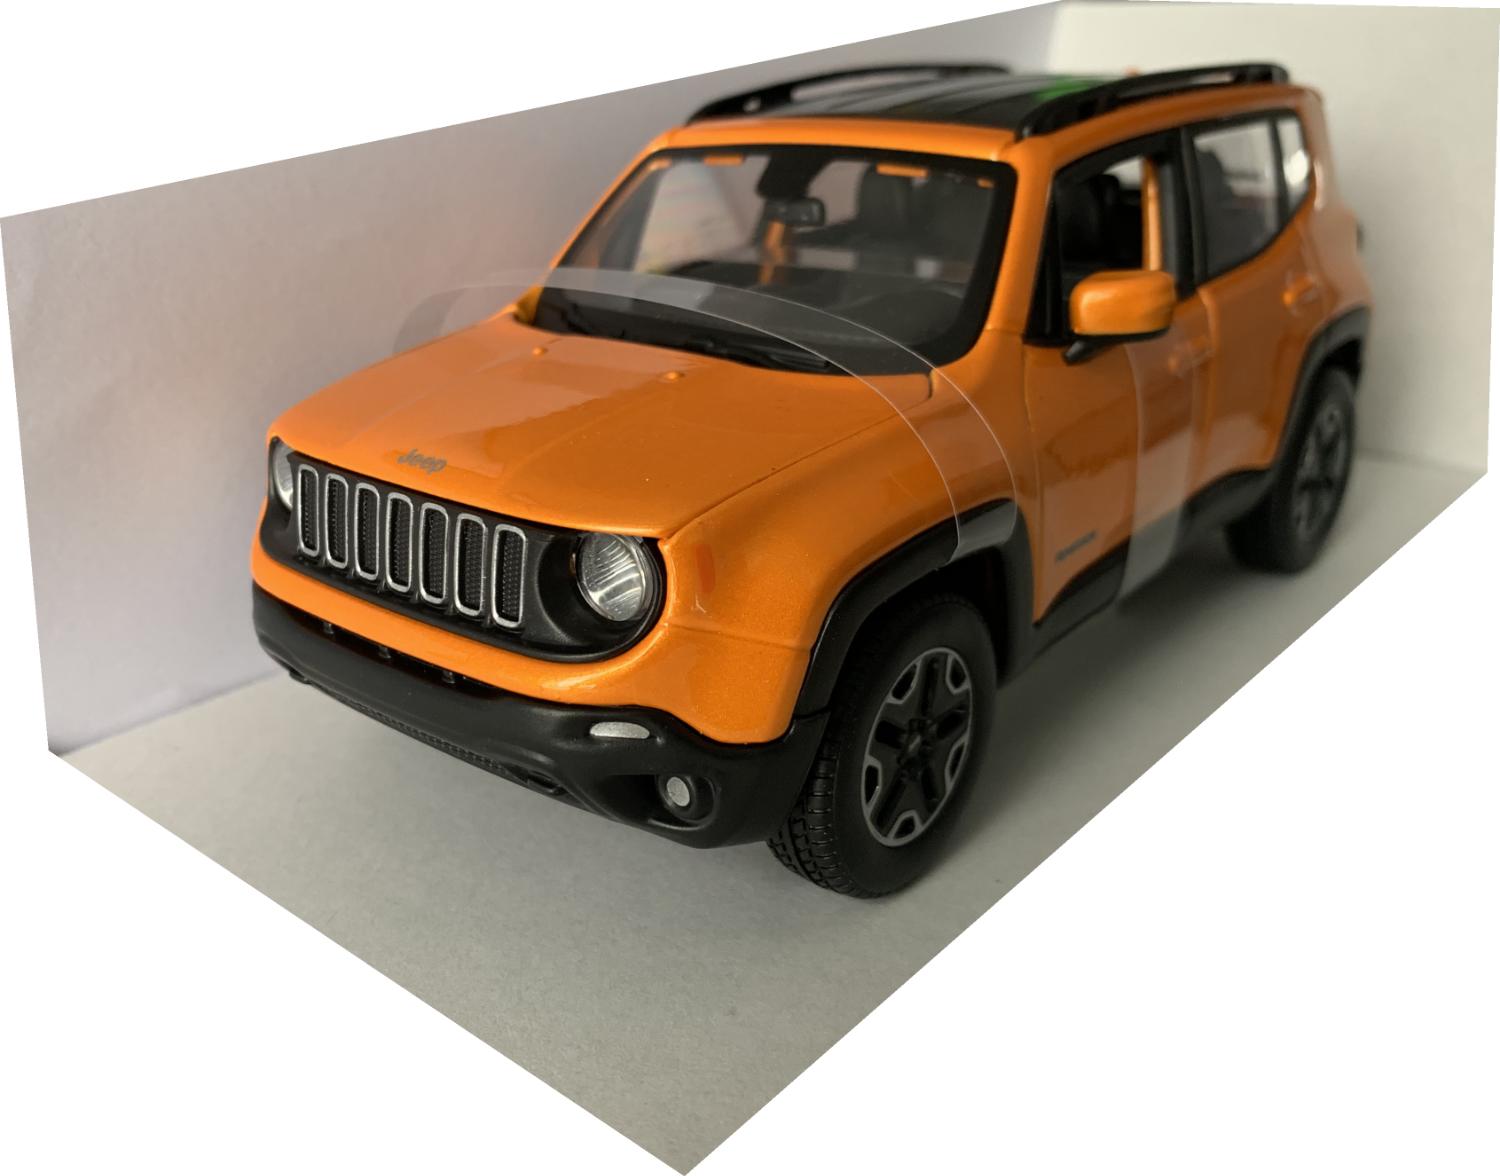 tor grille with the lettering Renegade on either side of the front doors.  The Jeep lettering also extends to the rear and centre of steering wheel.  The model is presented in a window display box, the car is approx. 17.5 cm long and the presentation box is 23 cm long